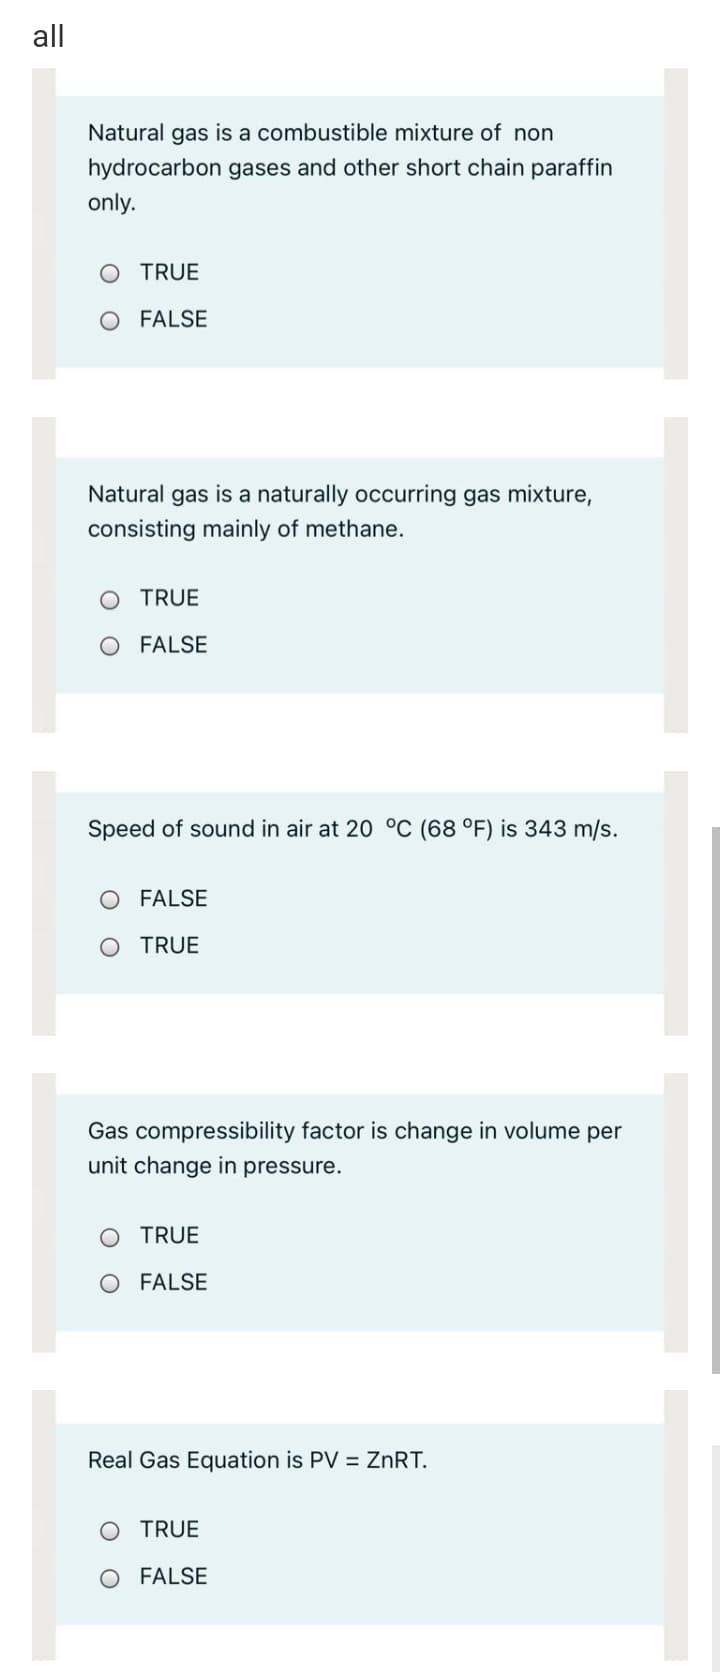 all
Natural gas is a combustible mixture of non
hydrocarbon gases and other short chain paraffin
only.
TRUE
FALSE
Natural gas is a naturally occurring gas mixture,
consisting mainly of methane.
O TRUE
O FALSE
Speed of sound in air at 20 °C (68 °F) is 343 m/s.
O FALSE
O TRUE
Gas compressibility factor is change in volume per
unit change in pressure.
O TRUE
O FALSE
Real Gas Equation is PV = ZNRT.
O TRUE
O FALSE
